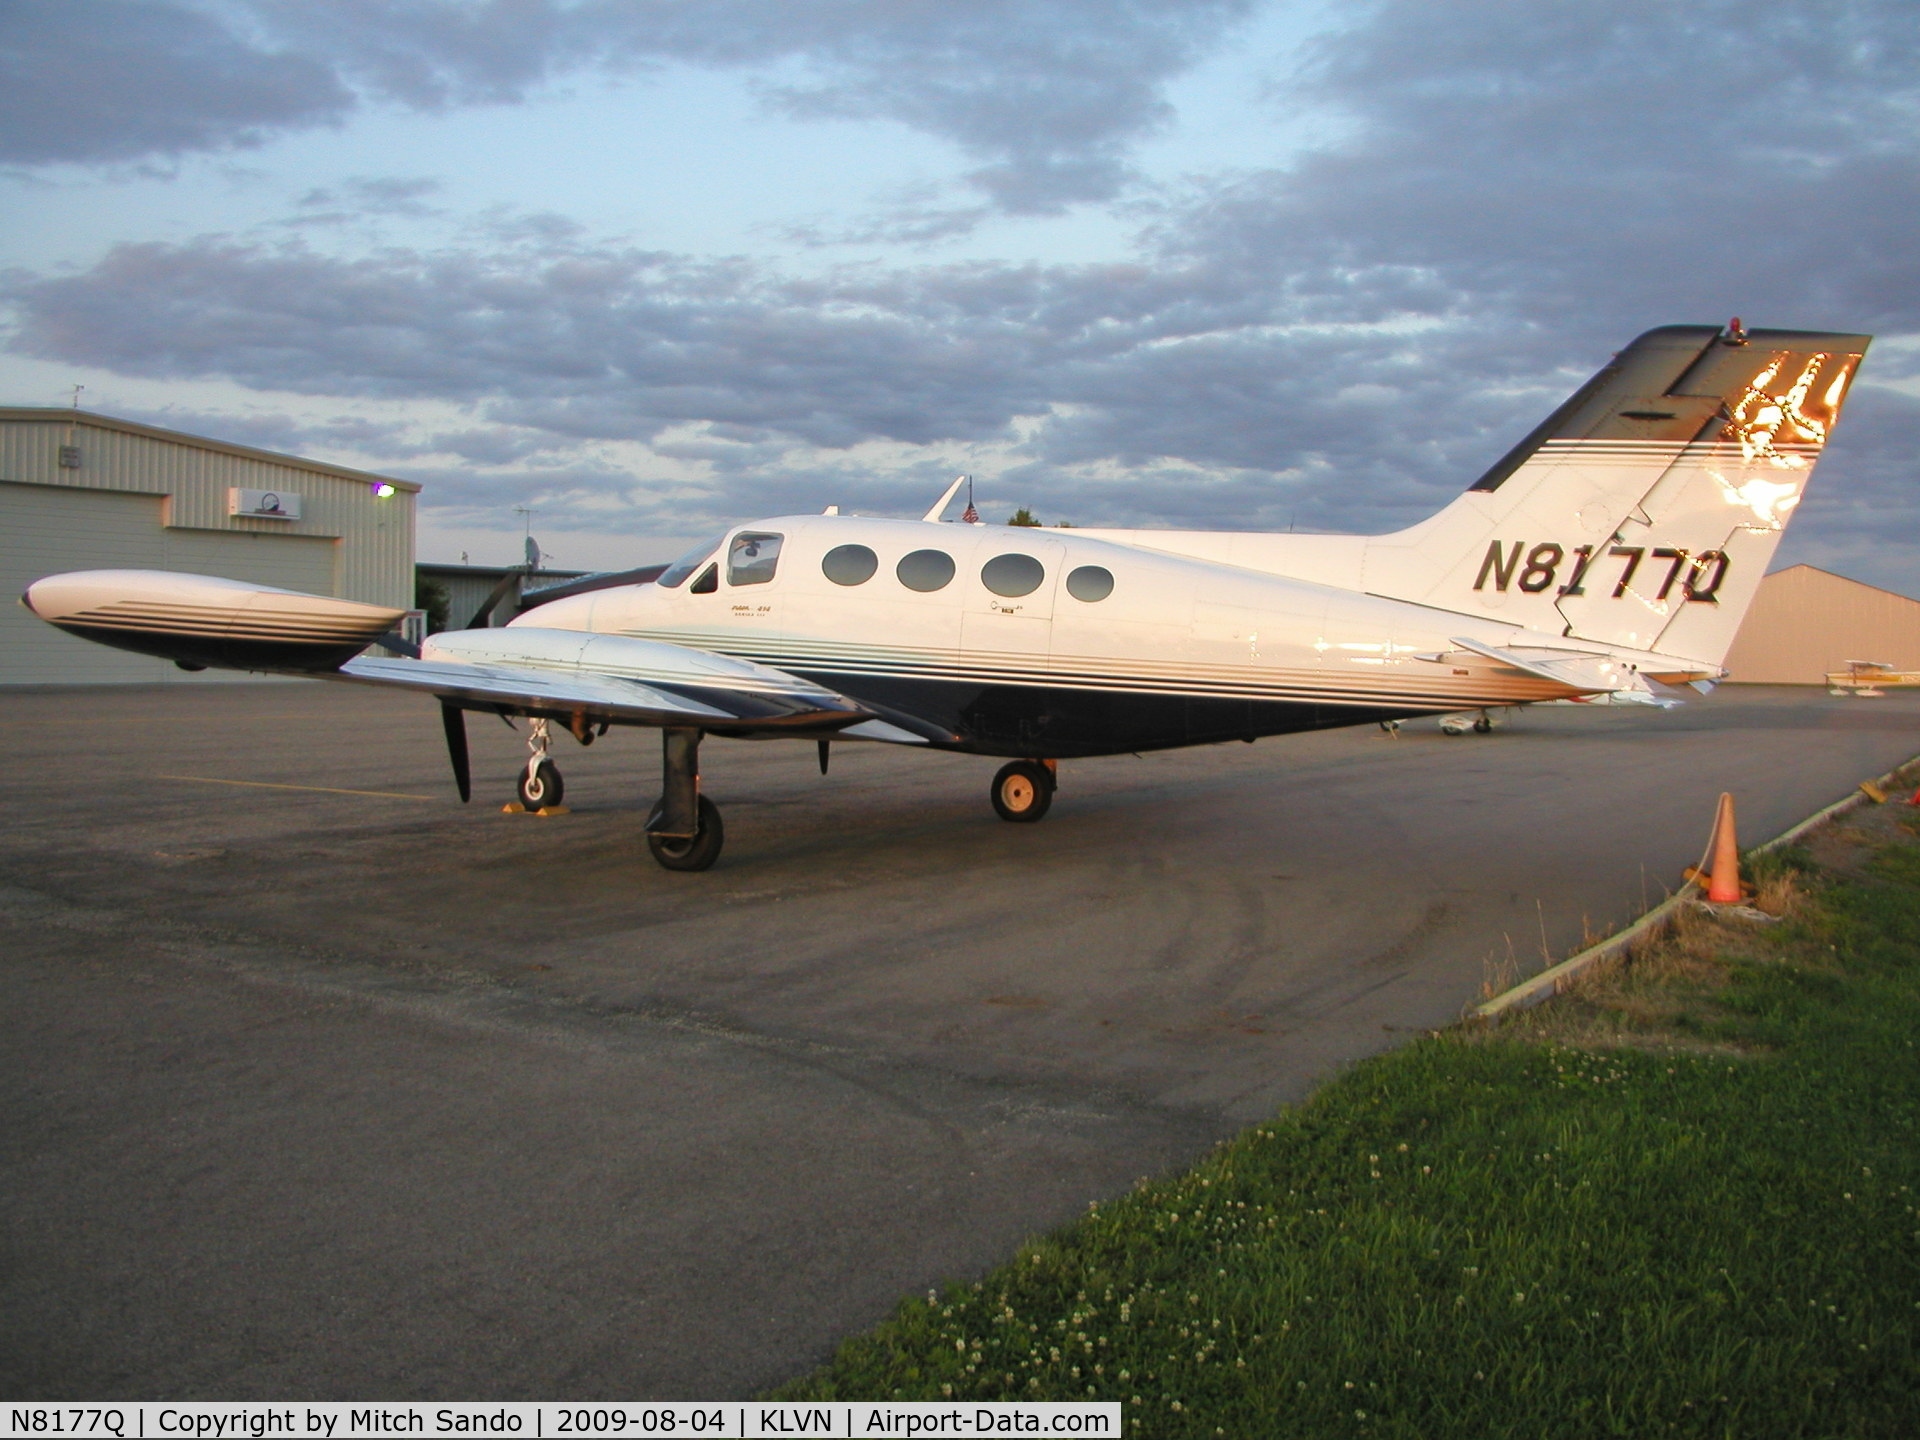 N8177Q, 1970 Cessna 414 Chancellor C/N 414-0077, Parked on the ramp at Airlake.